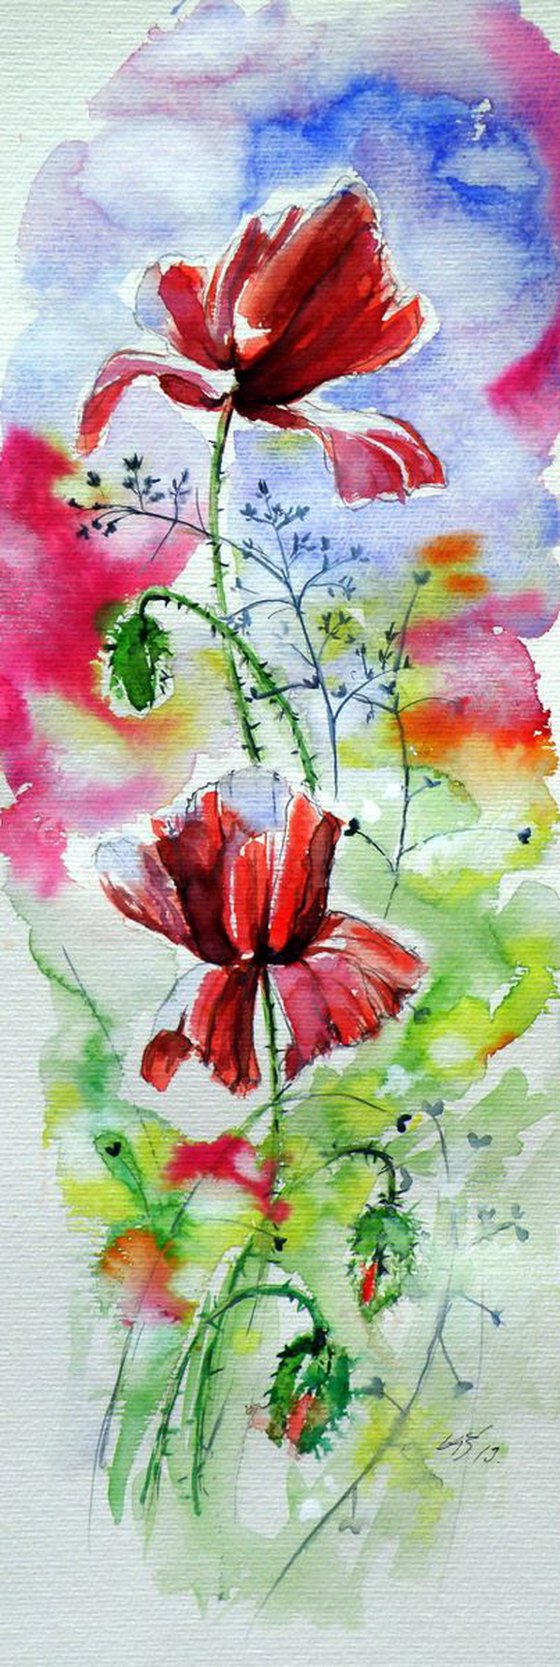 Poppies of summer IV